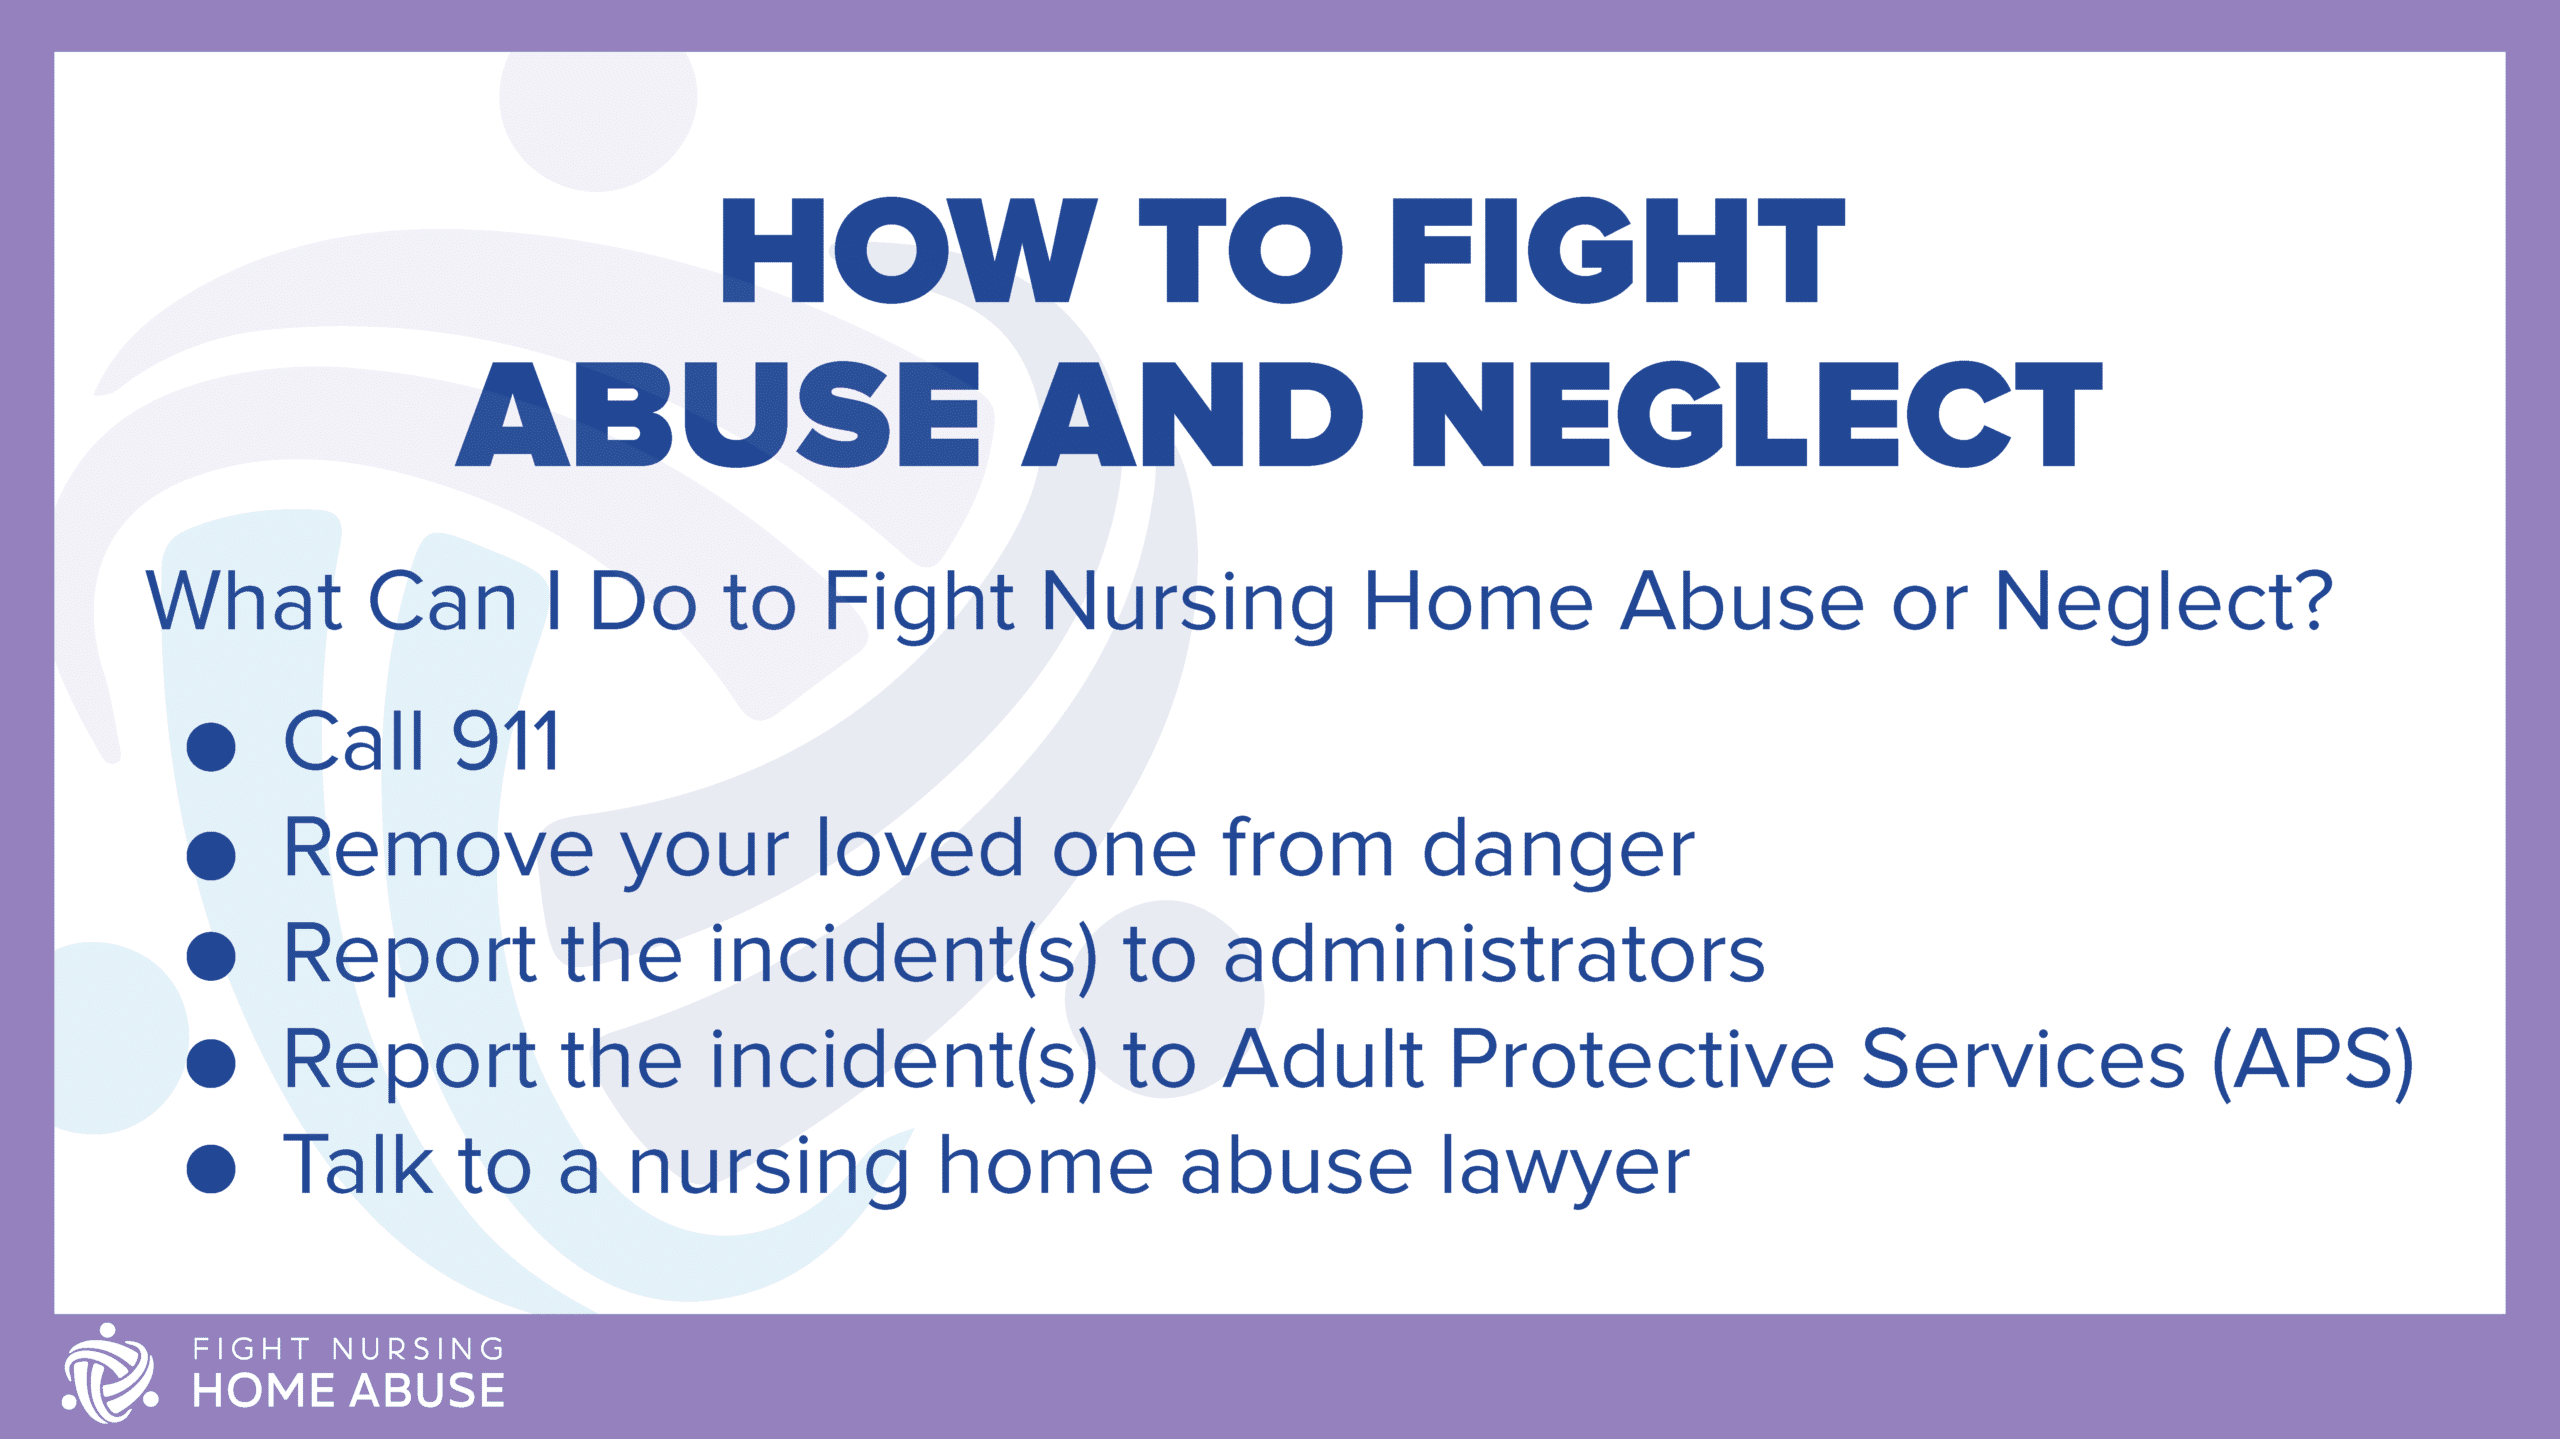 How to Fight Abuse and Neglect